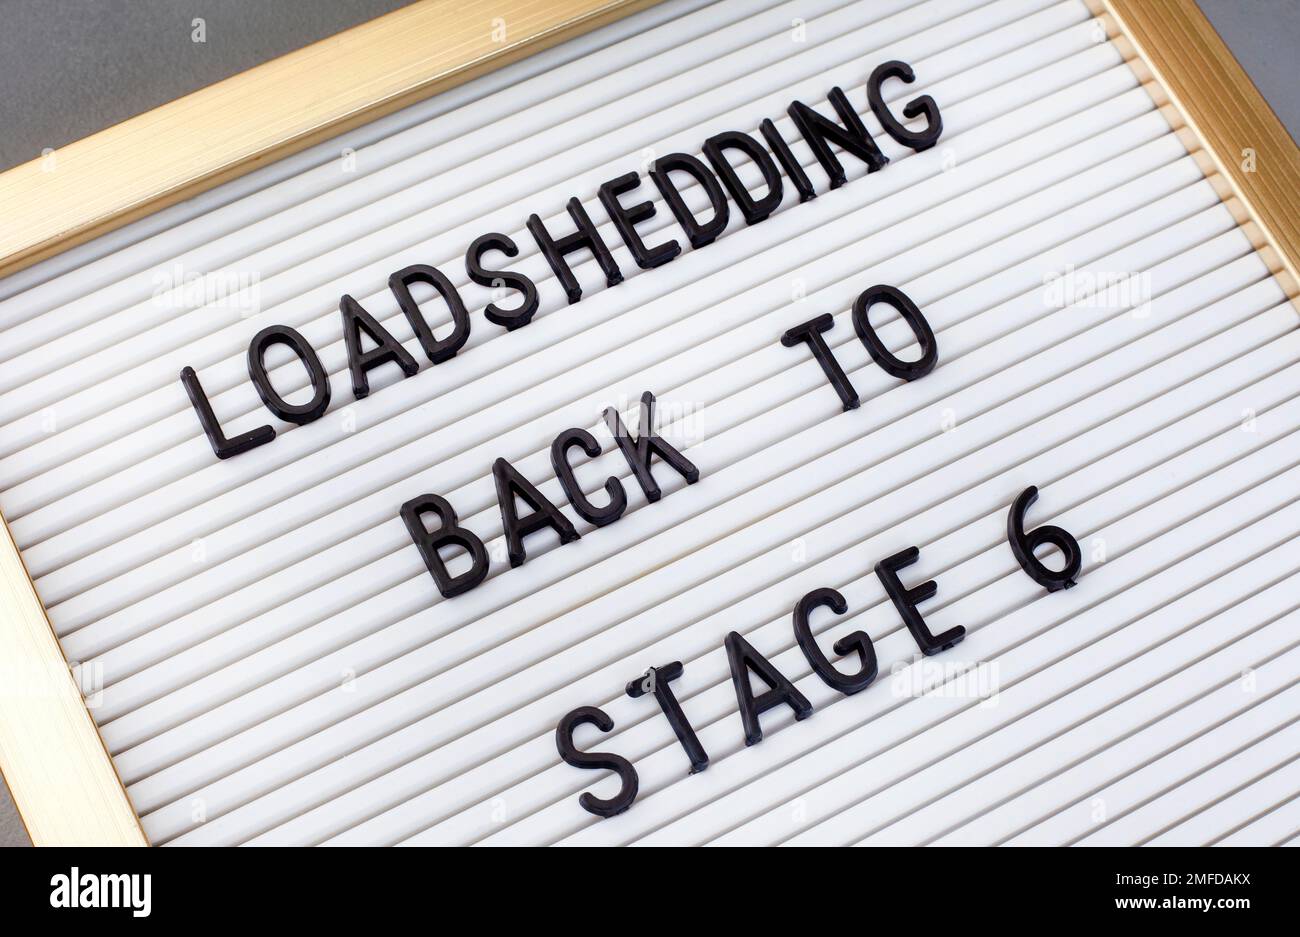 Load shedding back to stage 6, South African power crisis Stock Photo